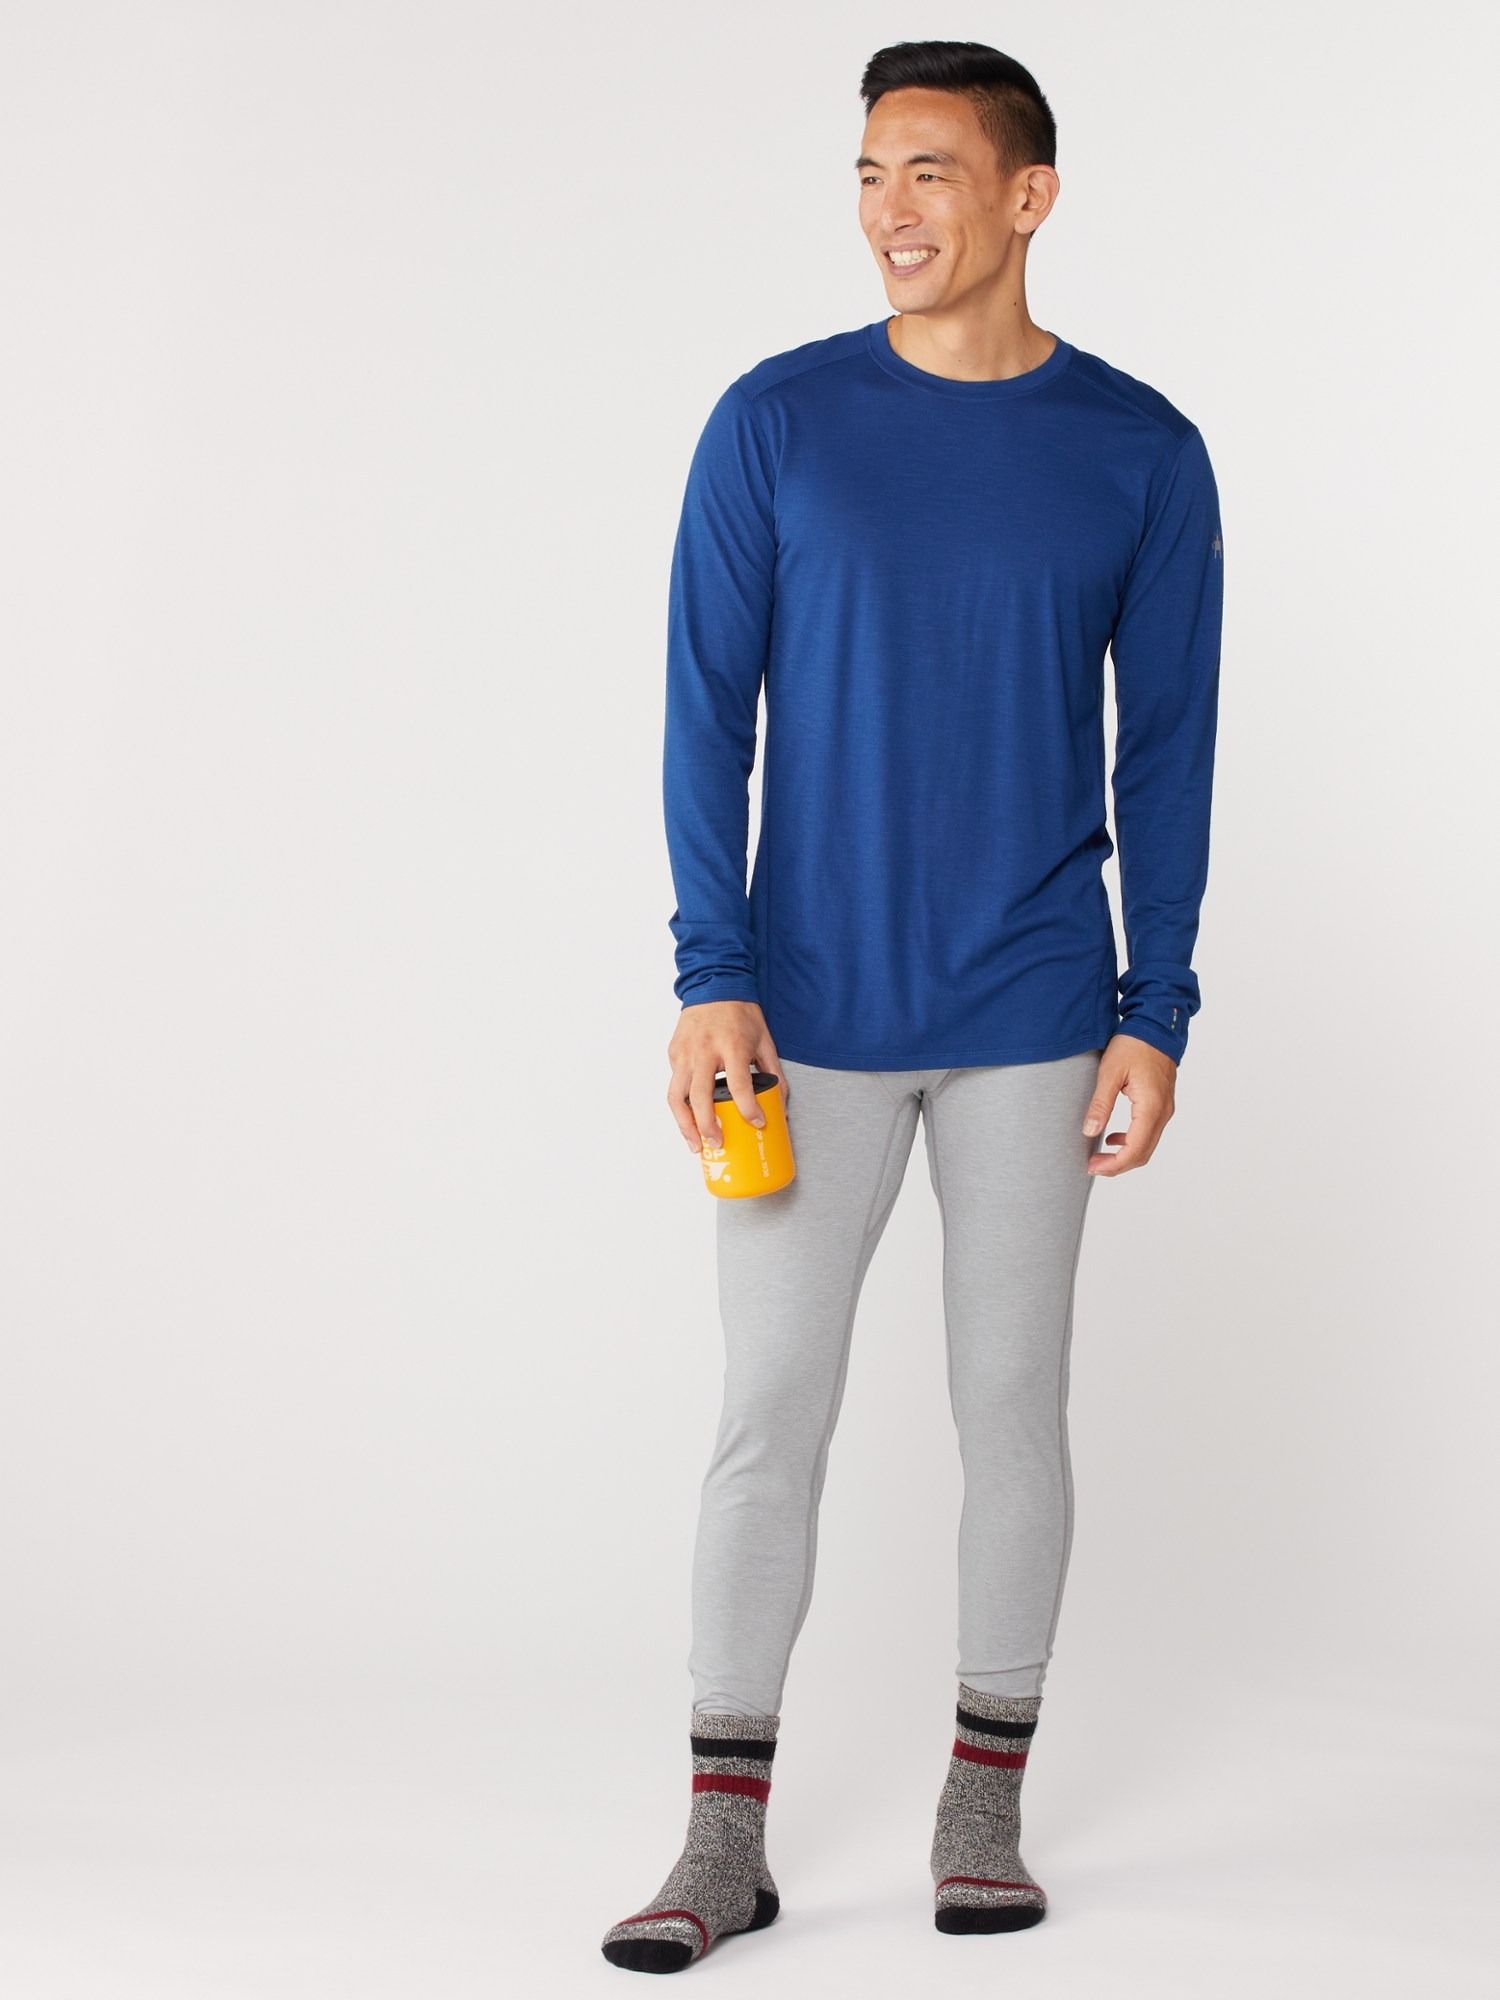 Best Thermal Underwear for Men in 2023: 14 Pairs of Men's Long Johns